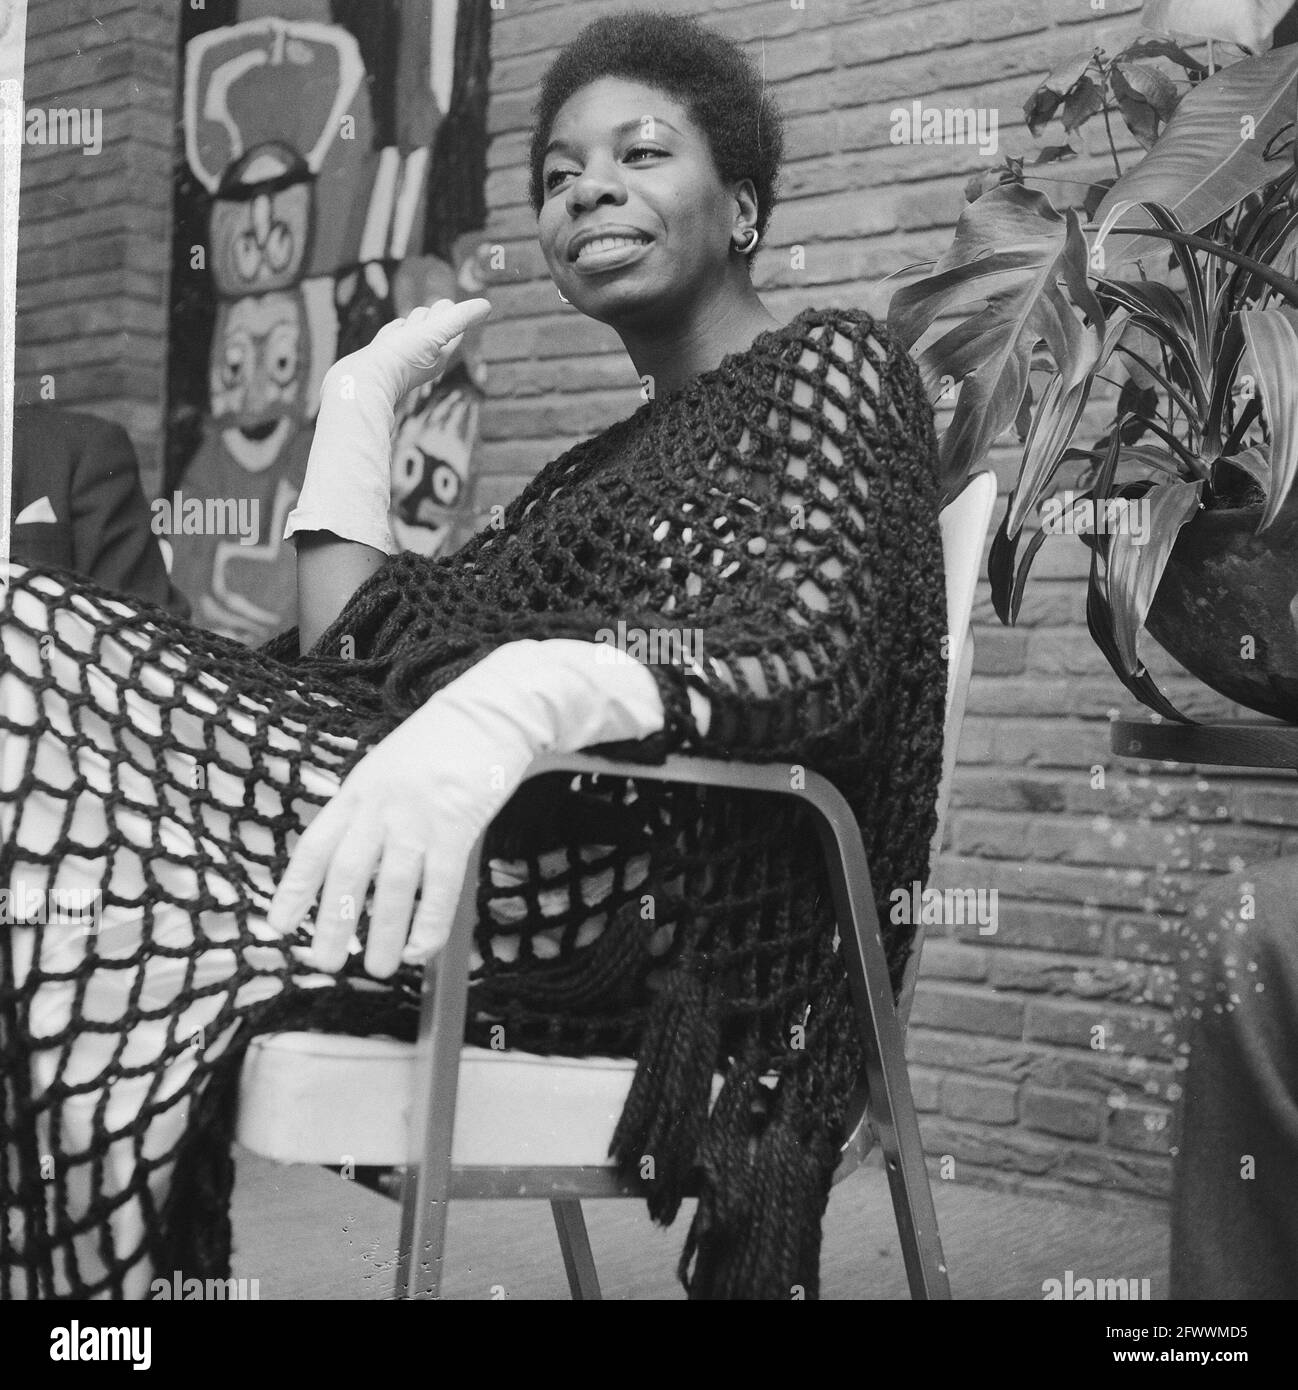 American singer Nina Simone to appear on television at Christmas, December 14, 1965, singers, The Netherlands, 20th century press agency photo, news to remember, documentary, historic photography 1945-1990, visual stories, human history of the Twentieth Century, capturing moments in time Stock Photo